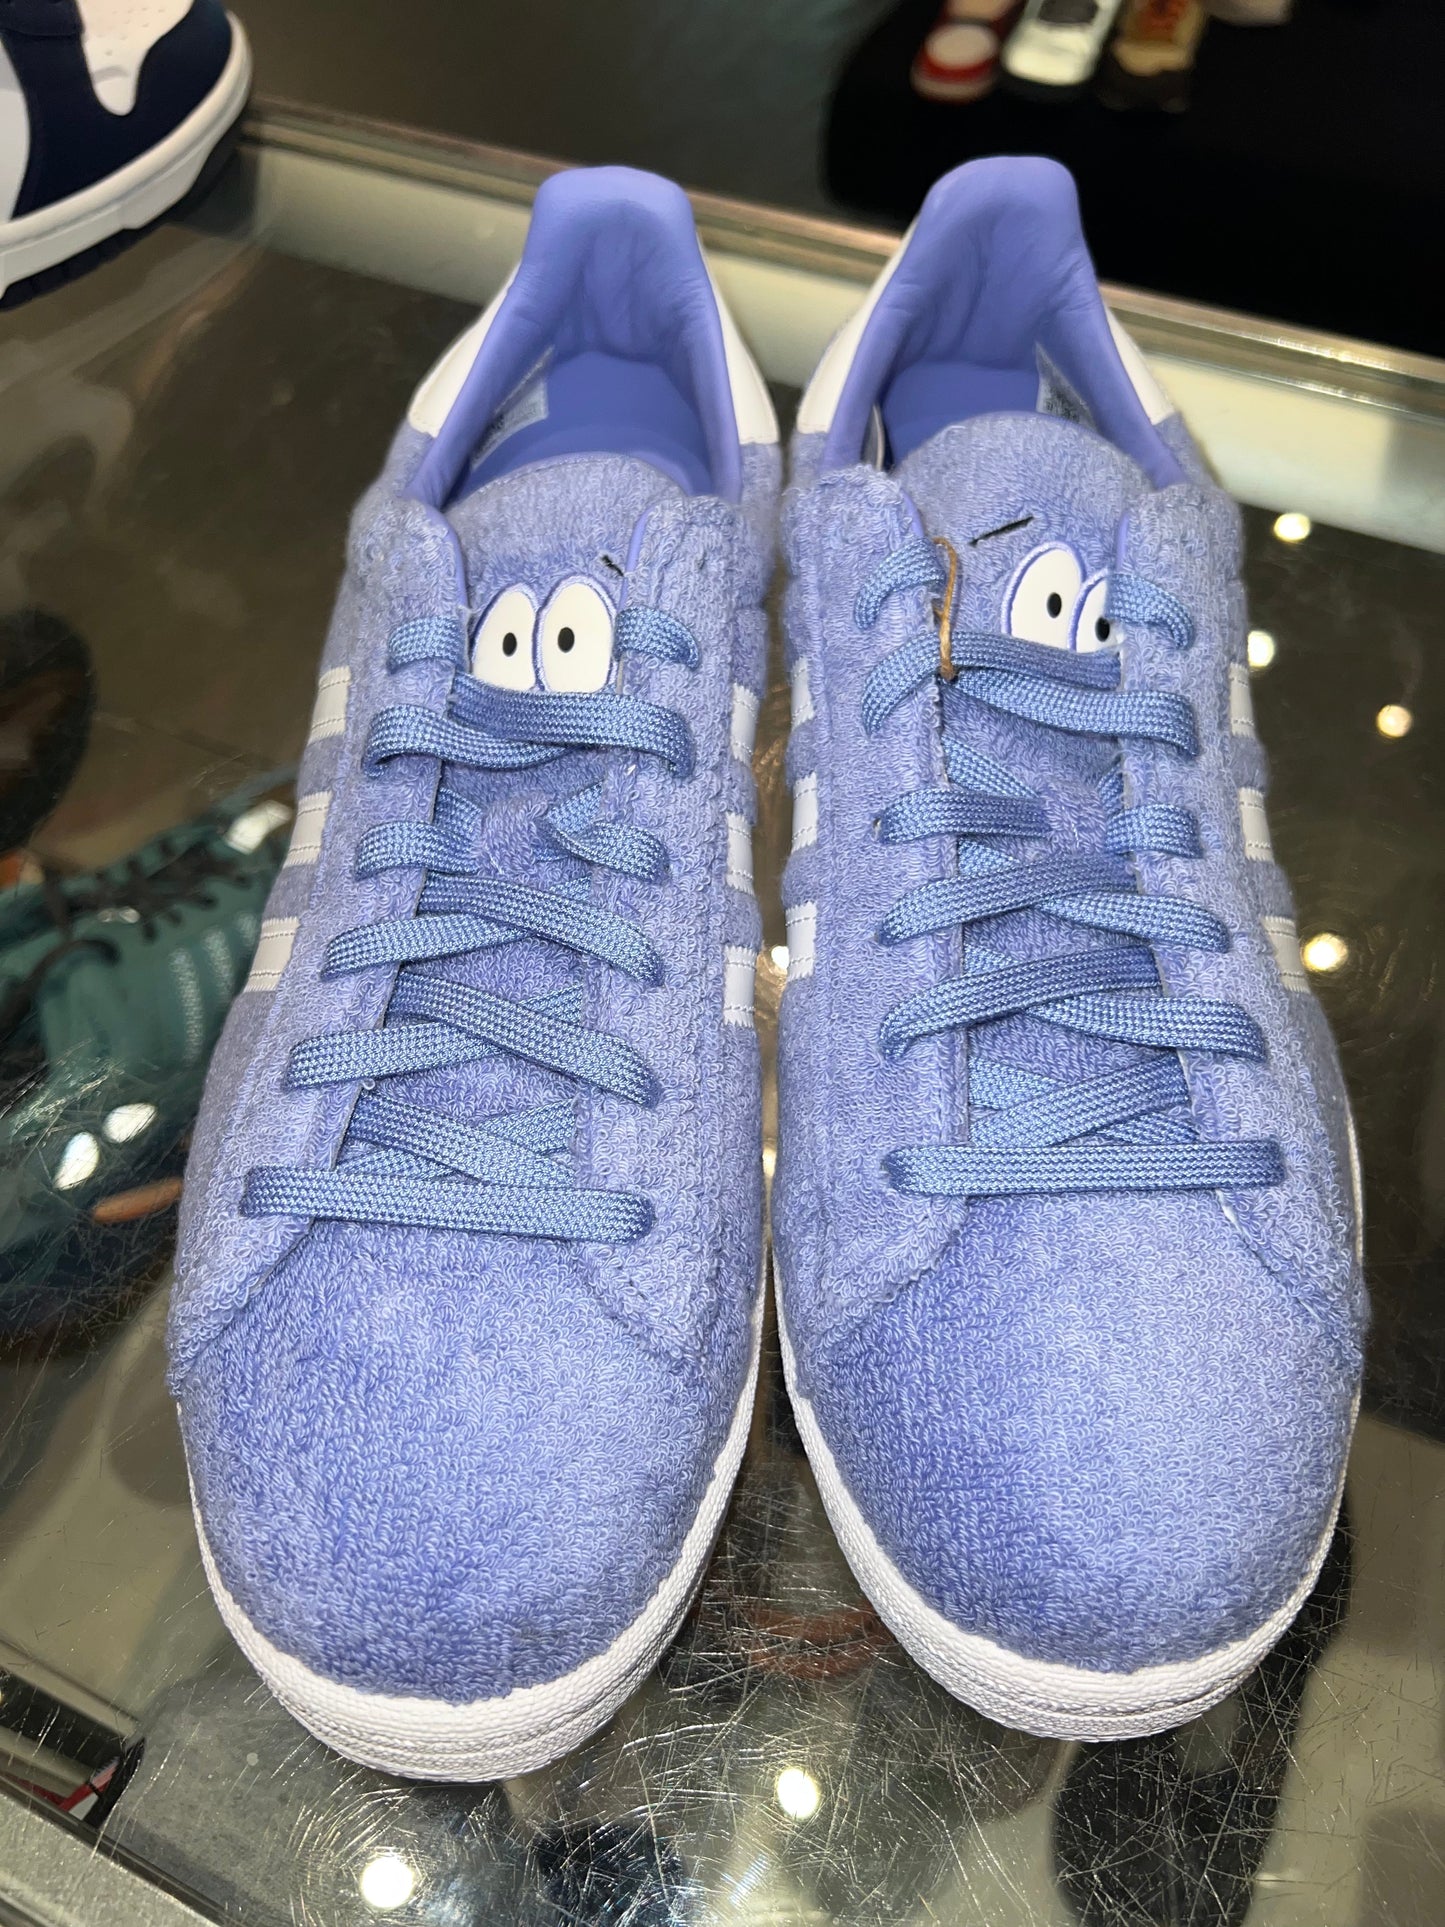 Size 10.5 Adidas Campus 80s “South Park Towelie” Brand New (Mall)